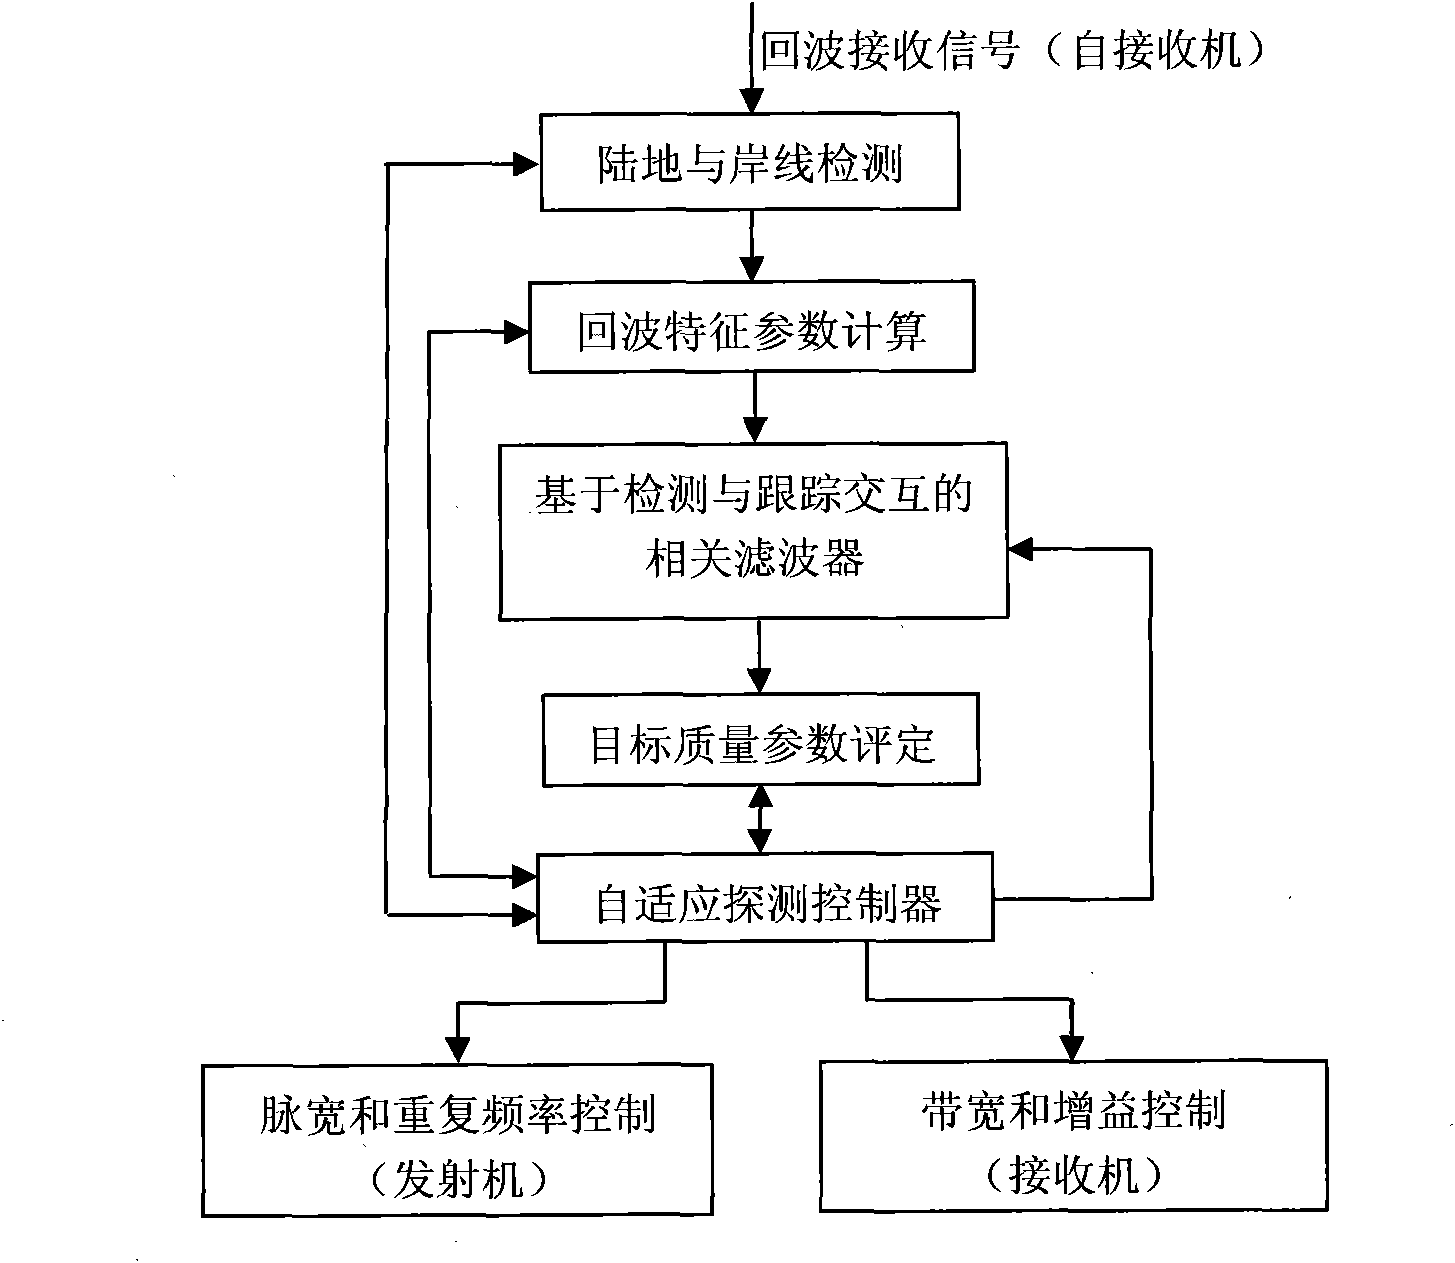 Marine radar detection system and detection method thereof